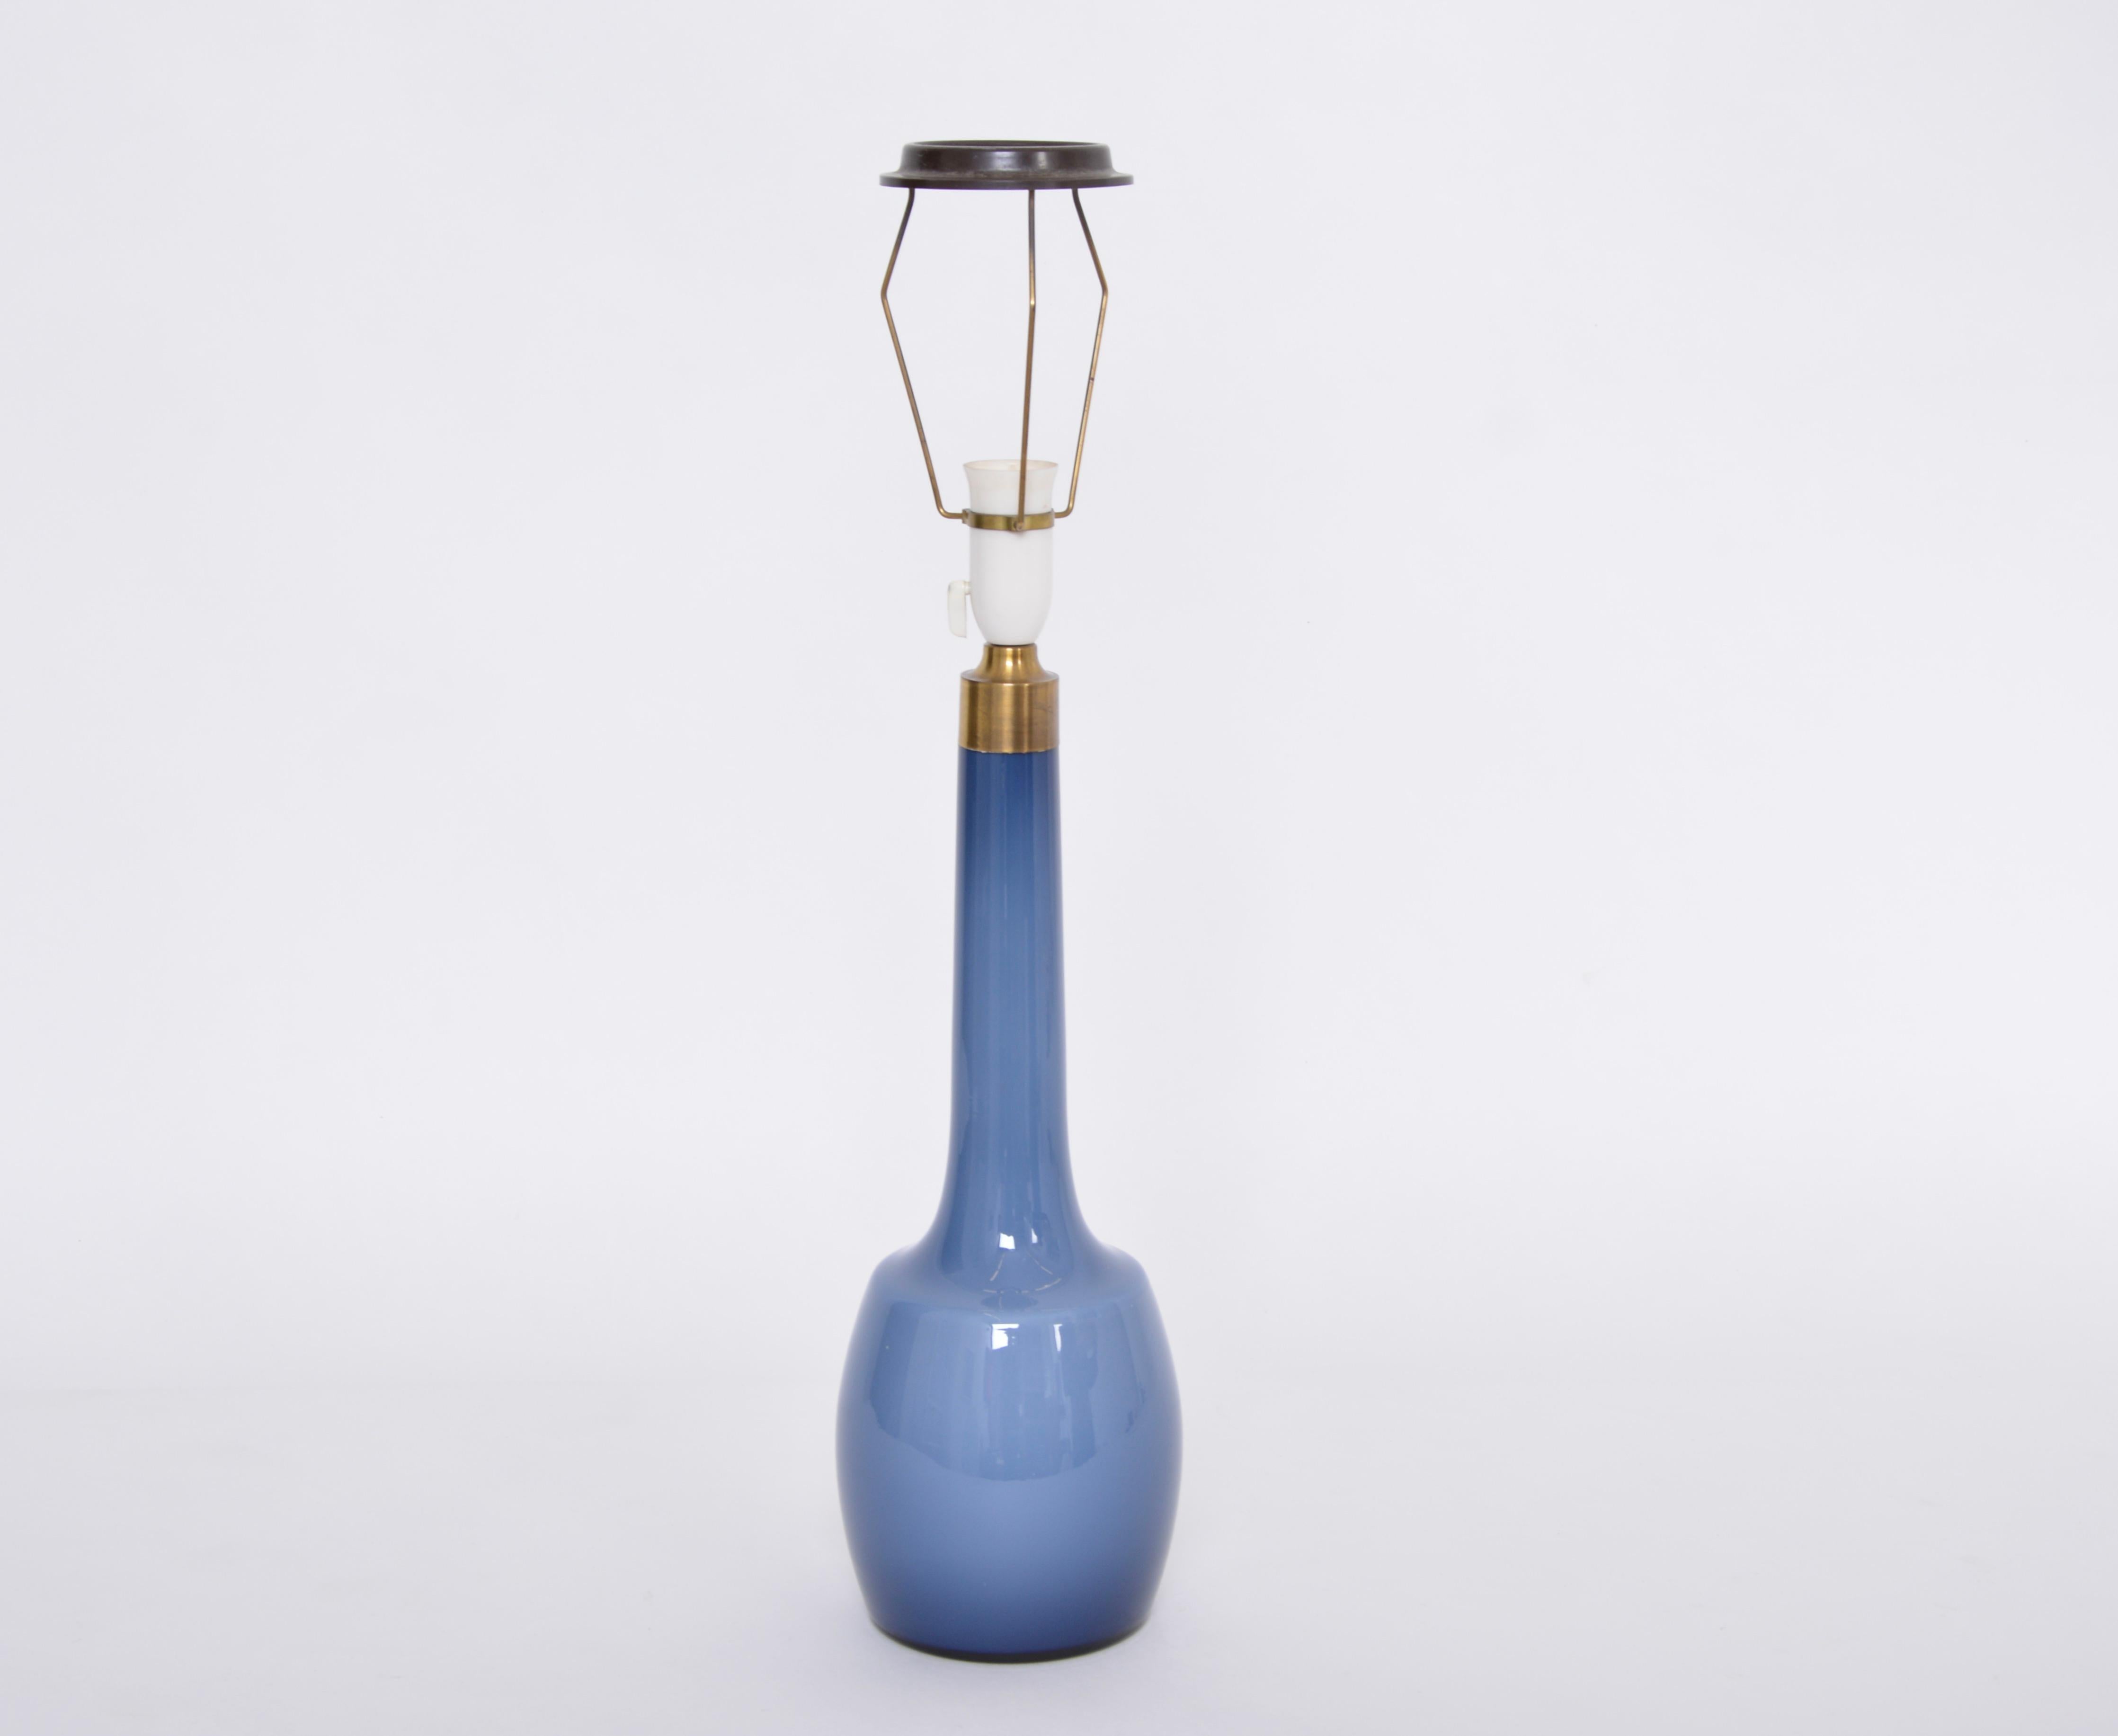 Rare Blue Danish Midcentury Table Lamp by Esben Klint for Holmegaard In Good Condition For Sale In Berlin, DE